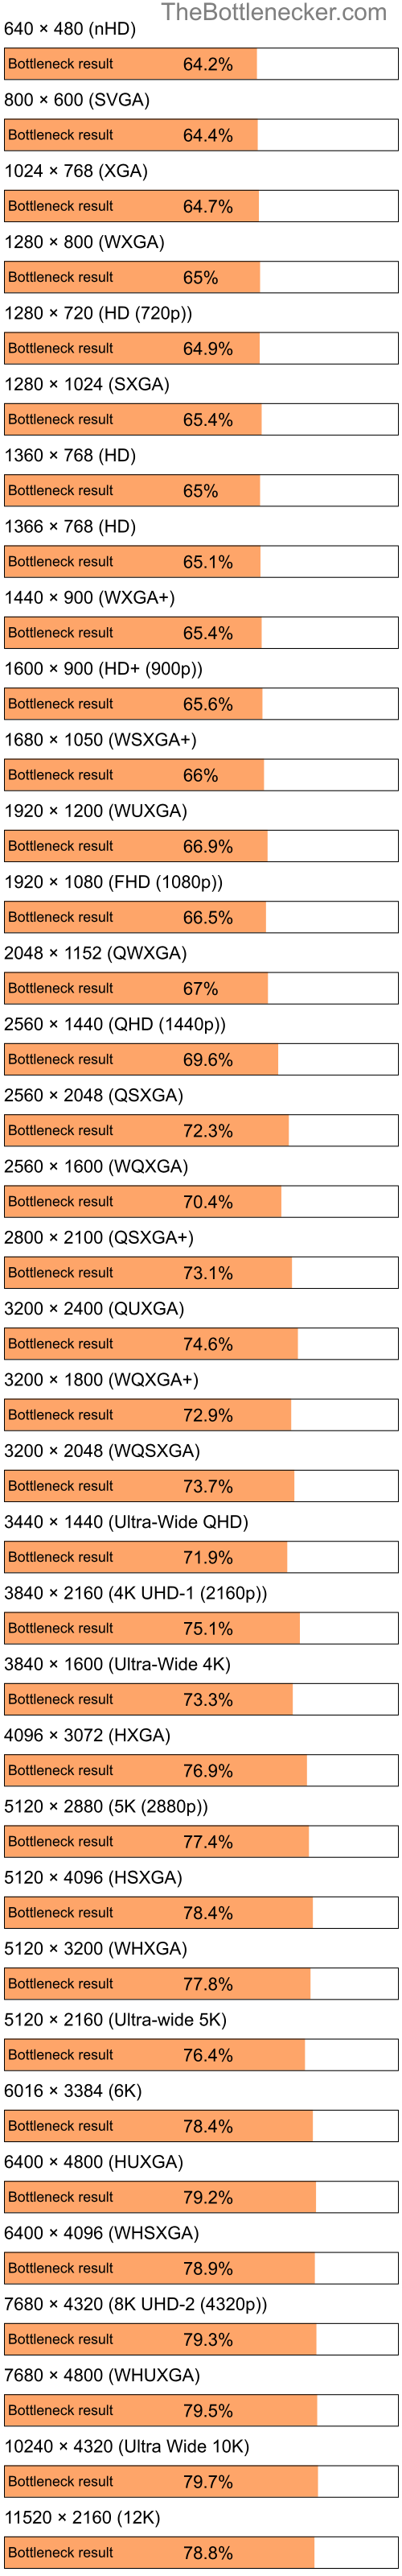 Bottleneck results by resolution for Intel Pentium 4 and AMD Radeon X1300 PRO in General Tasks